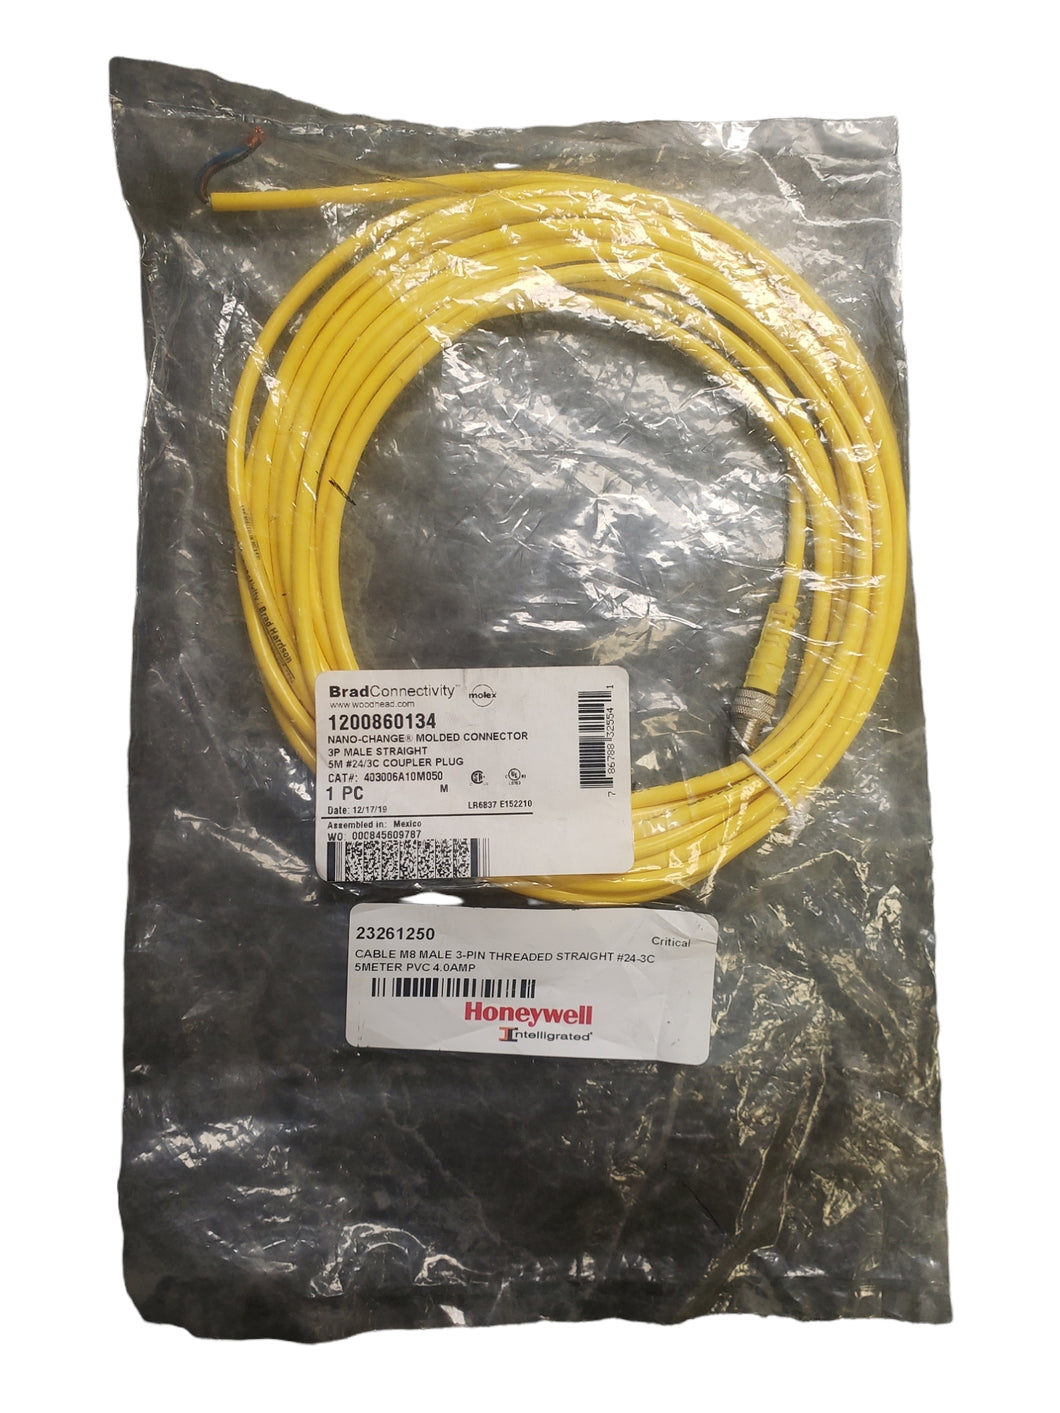 BRAD CONNECTIVITY NANO-CHANGE MOLDED CONNECTOR CABLE 1200860134 - NEW IN ORIGINAL PACKAGING - FreemanLiquidators - [product_description]